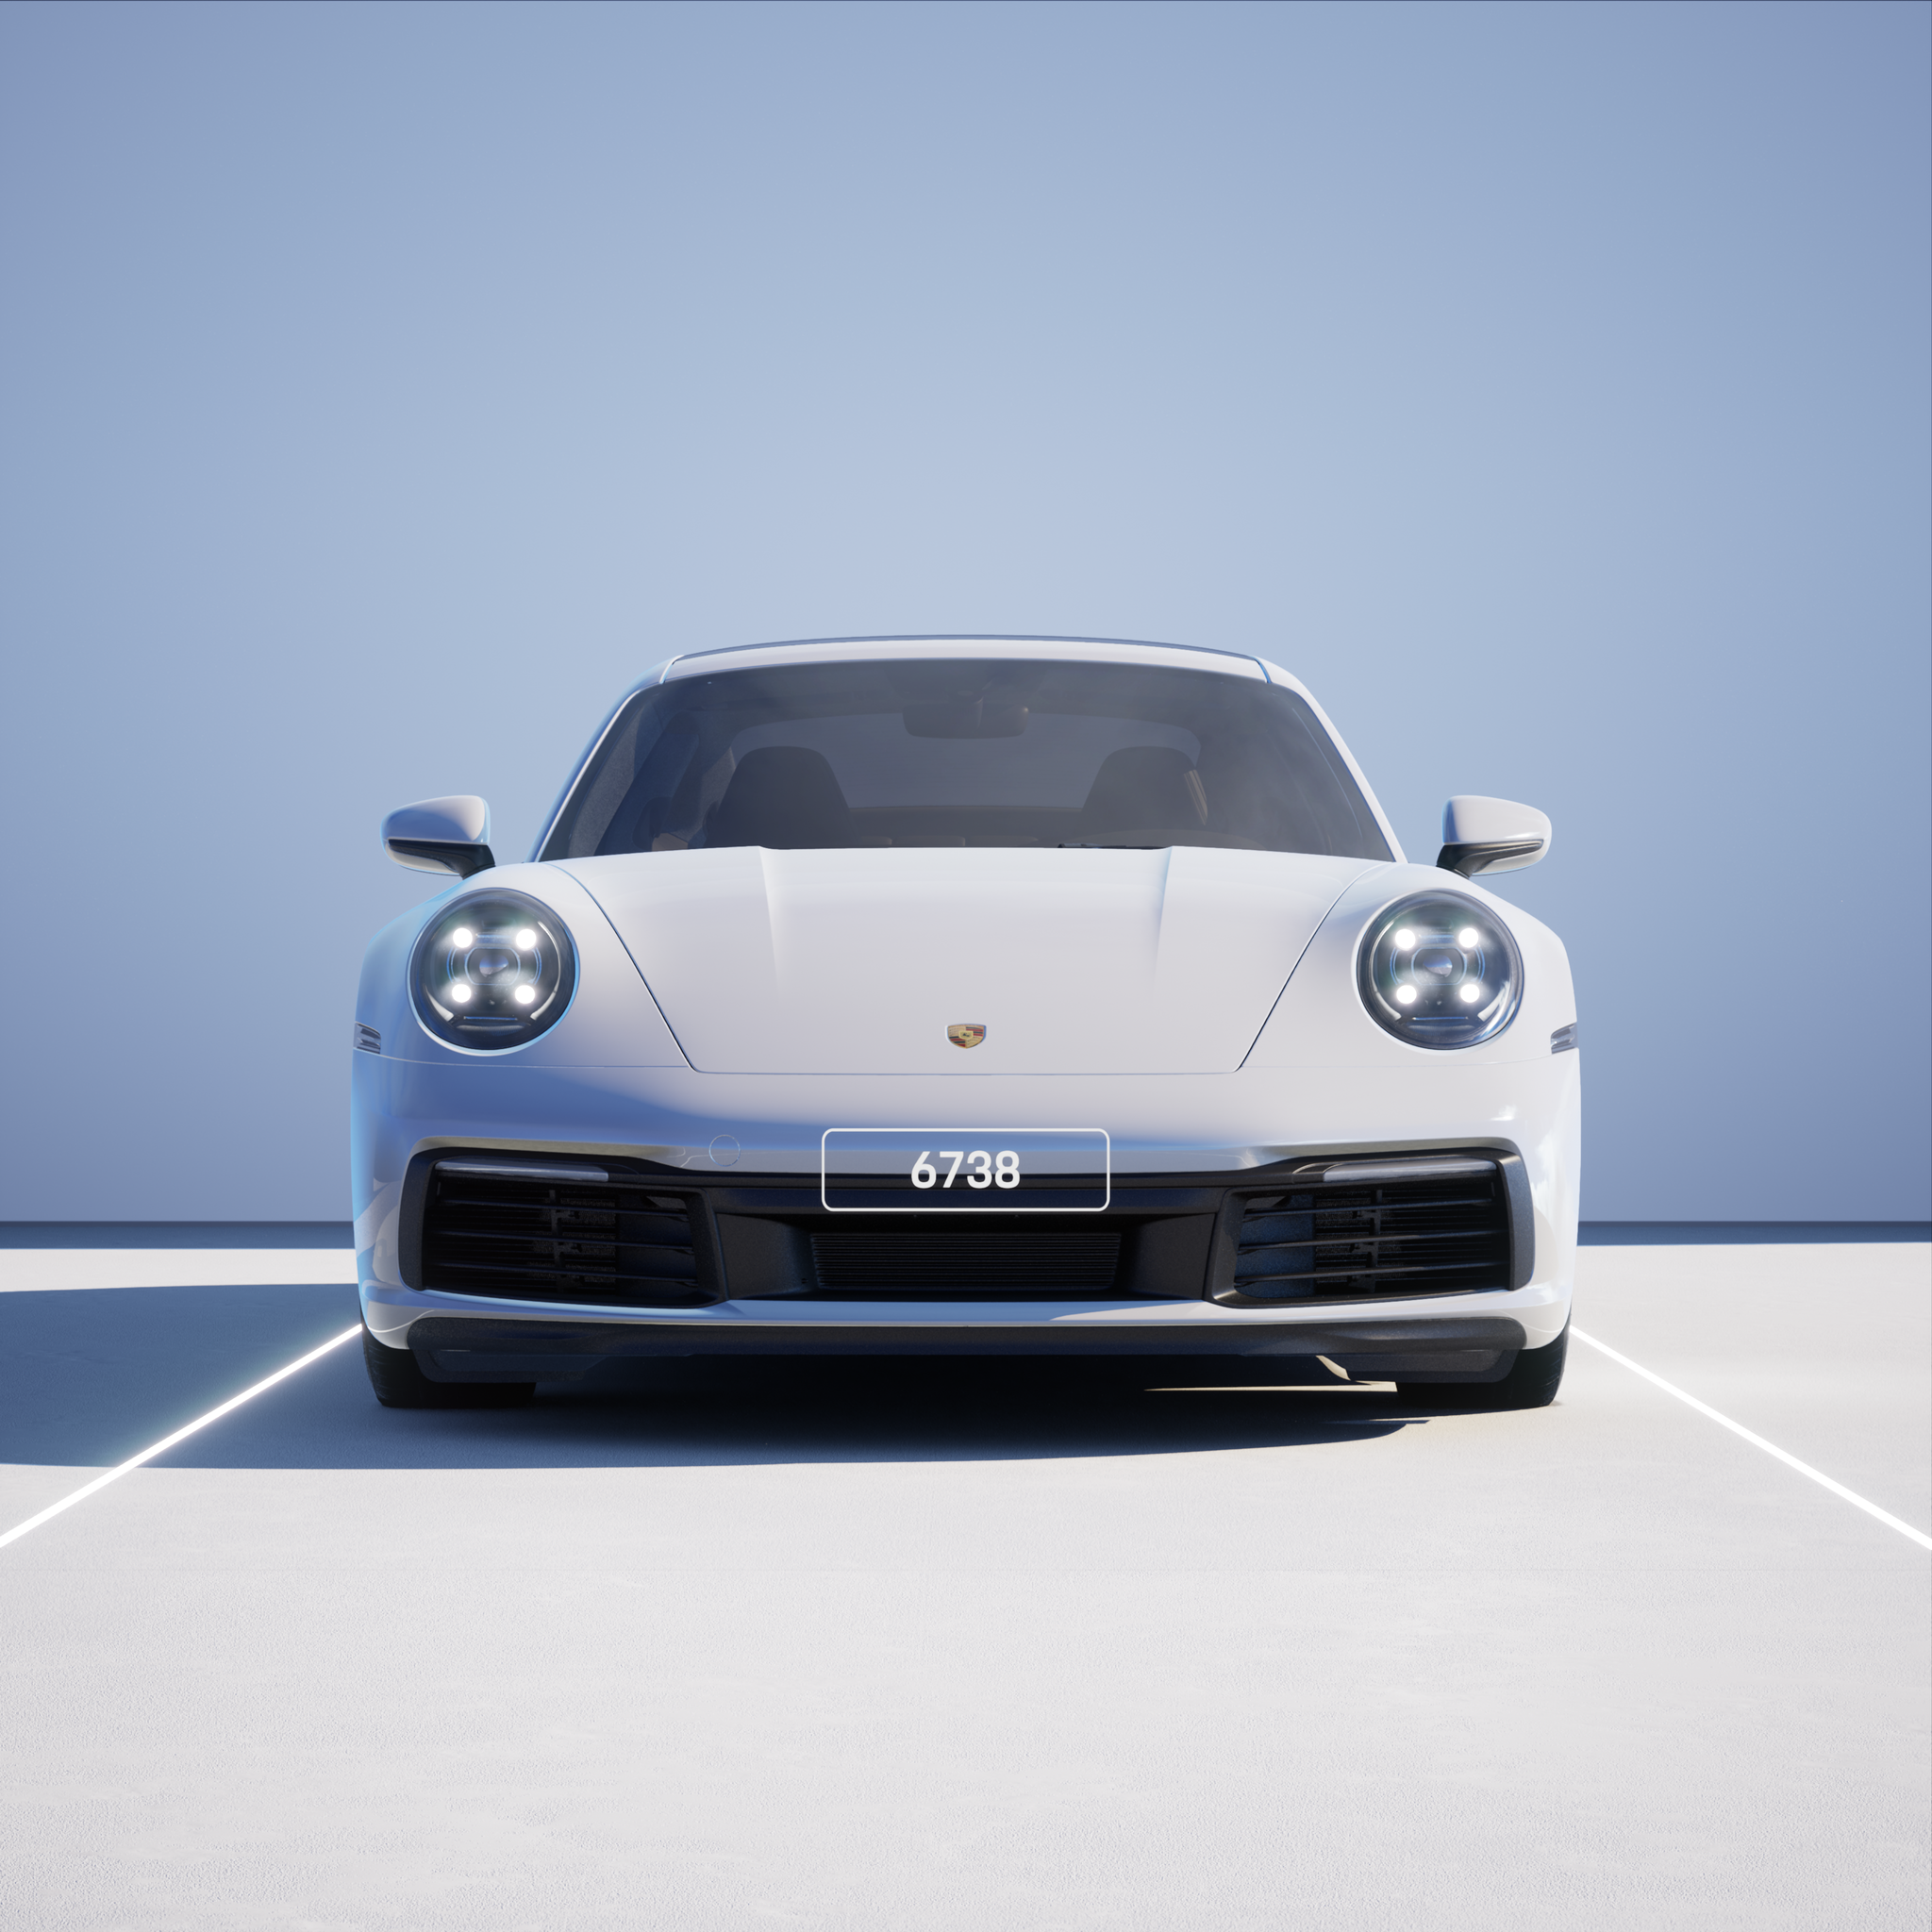 The PORSCHΞ 911 6738 image in phase